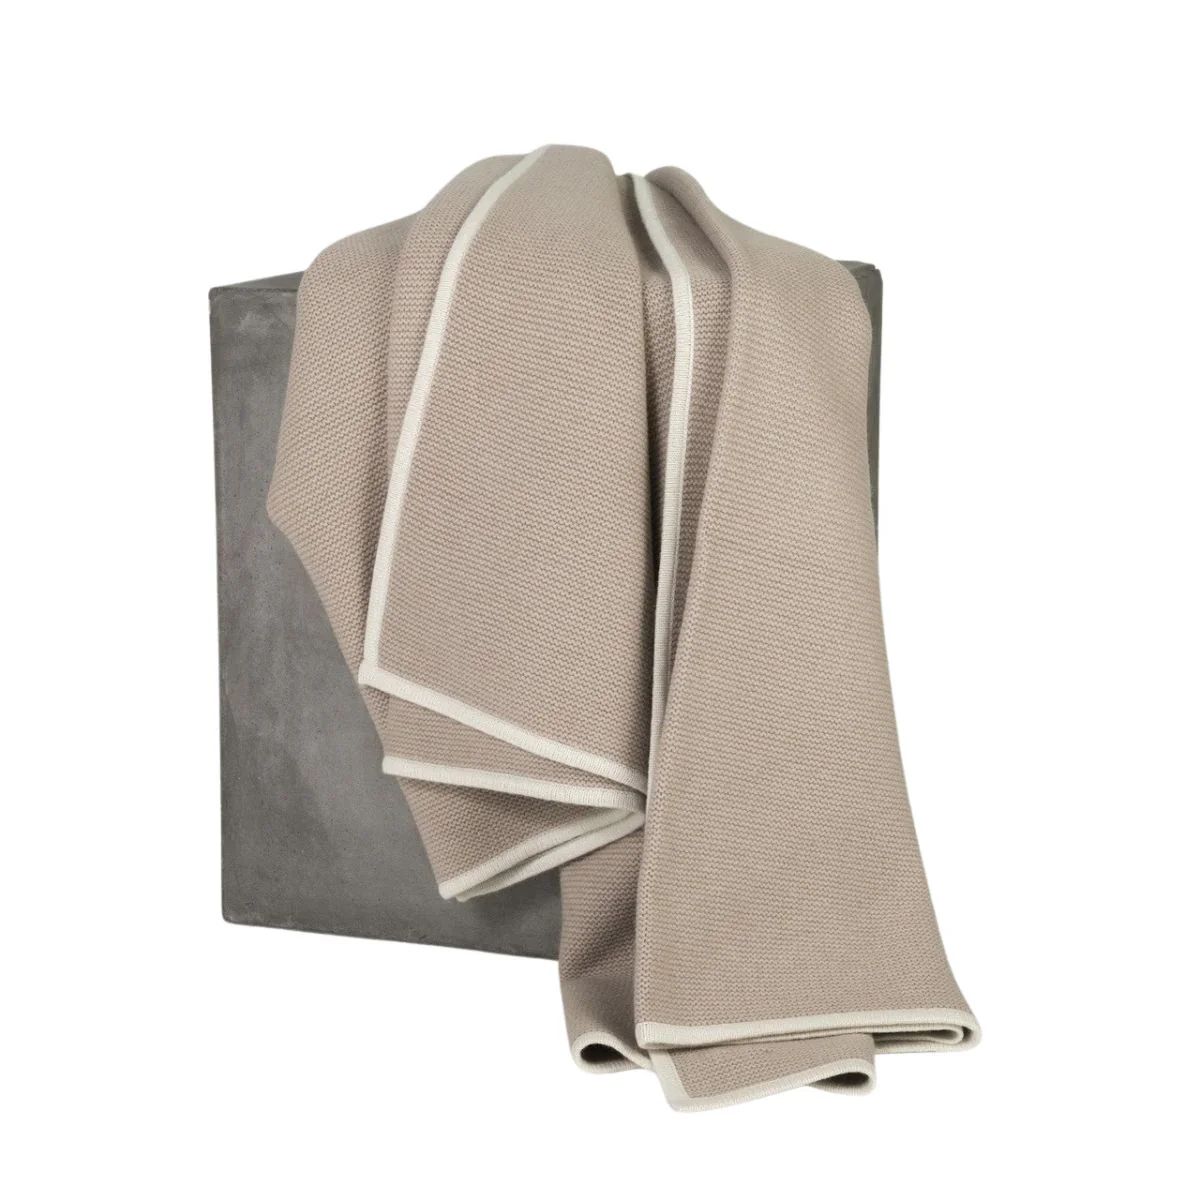 Soft Tan and Cream Purl Knit Cashmere Throw
 – Paloma and Co. | Paloma & Co.